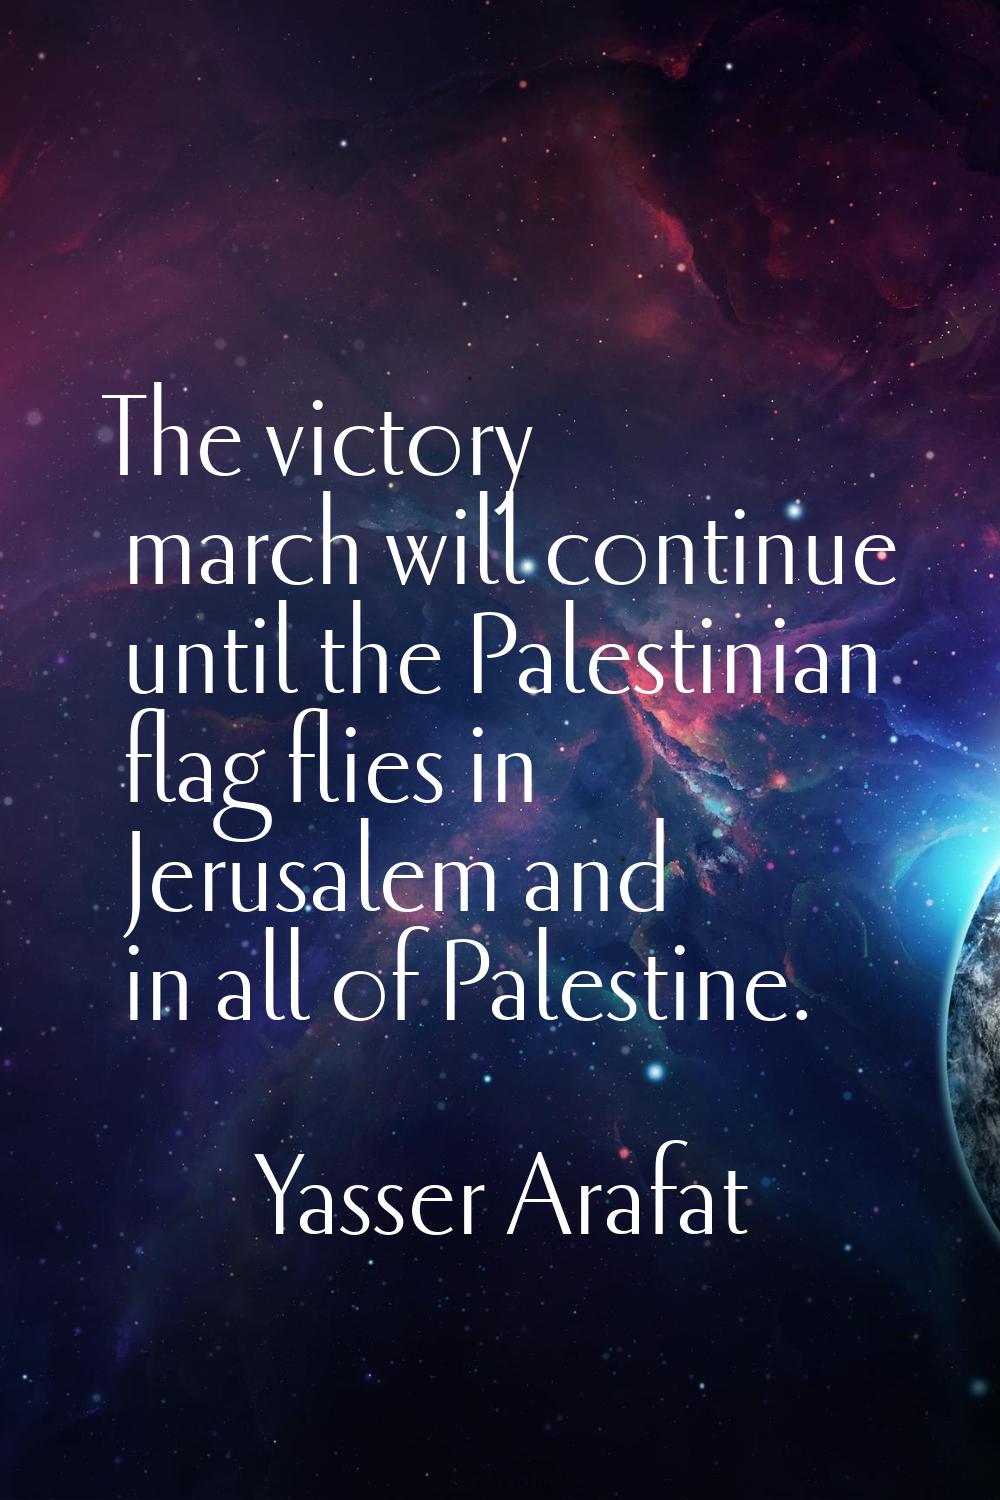 The victory march will continue until the Palestinian flag flies in Jerusalem and in all of Palesti